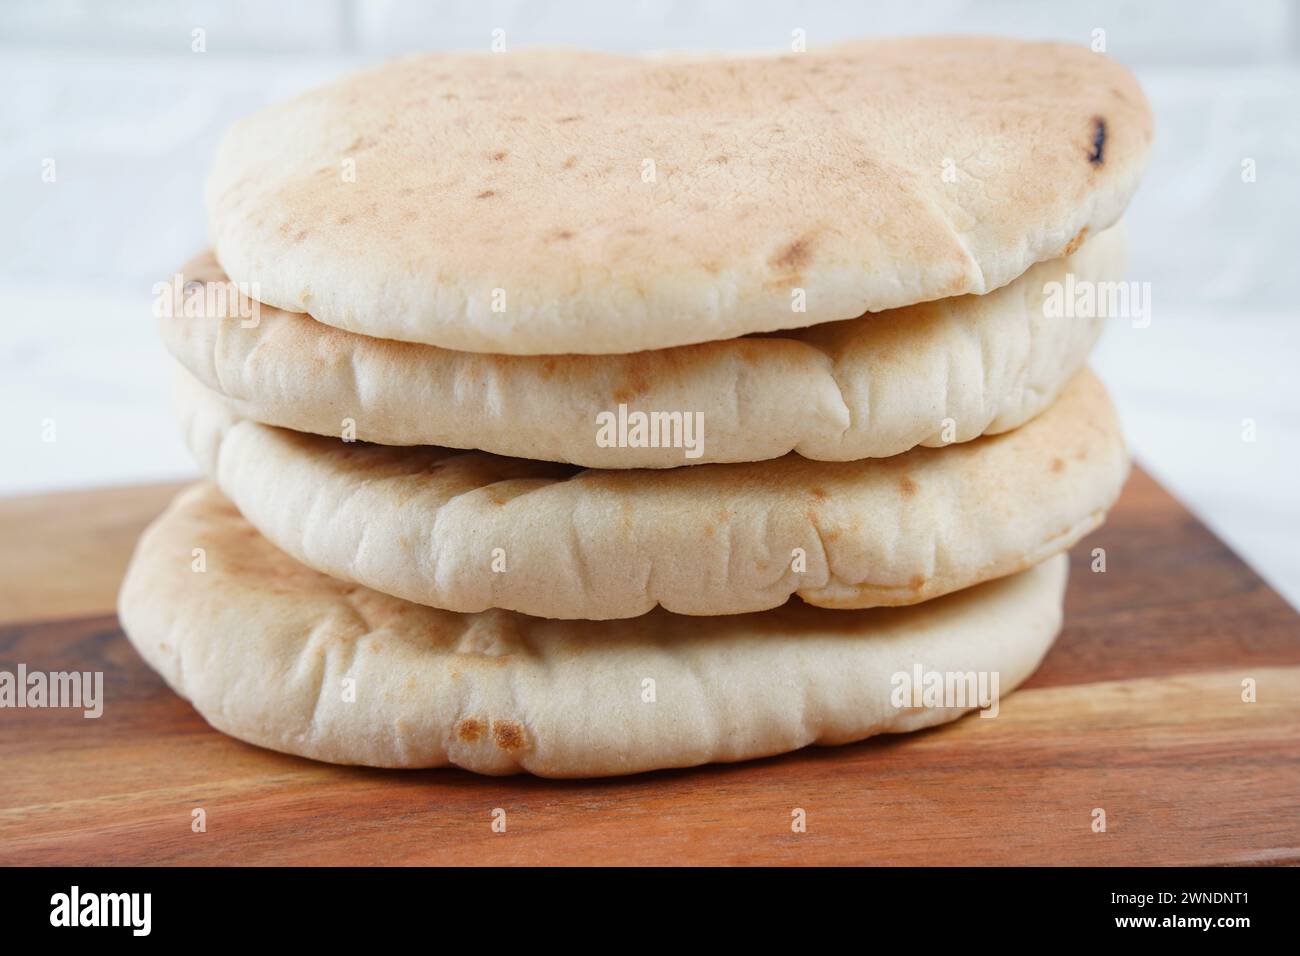 A stack of Pita bread(flat bread) on wooden board Stock Photo